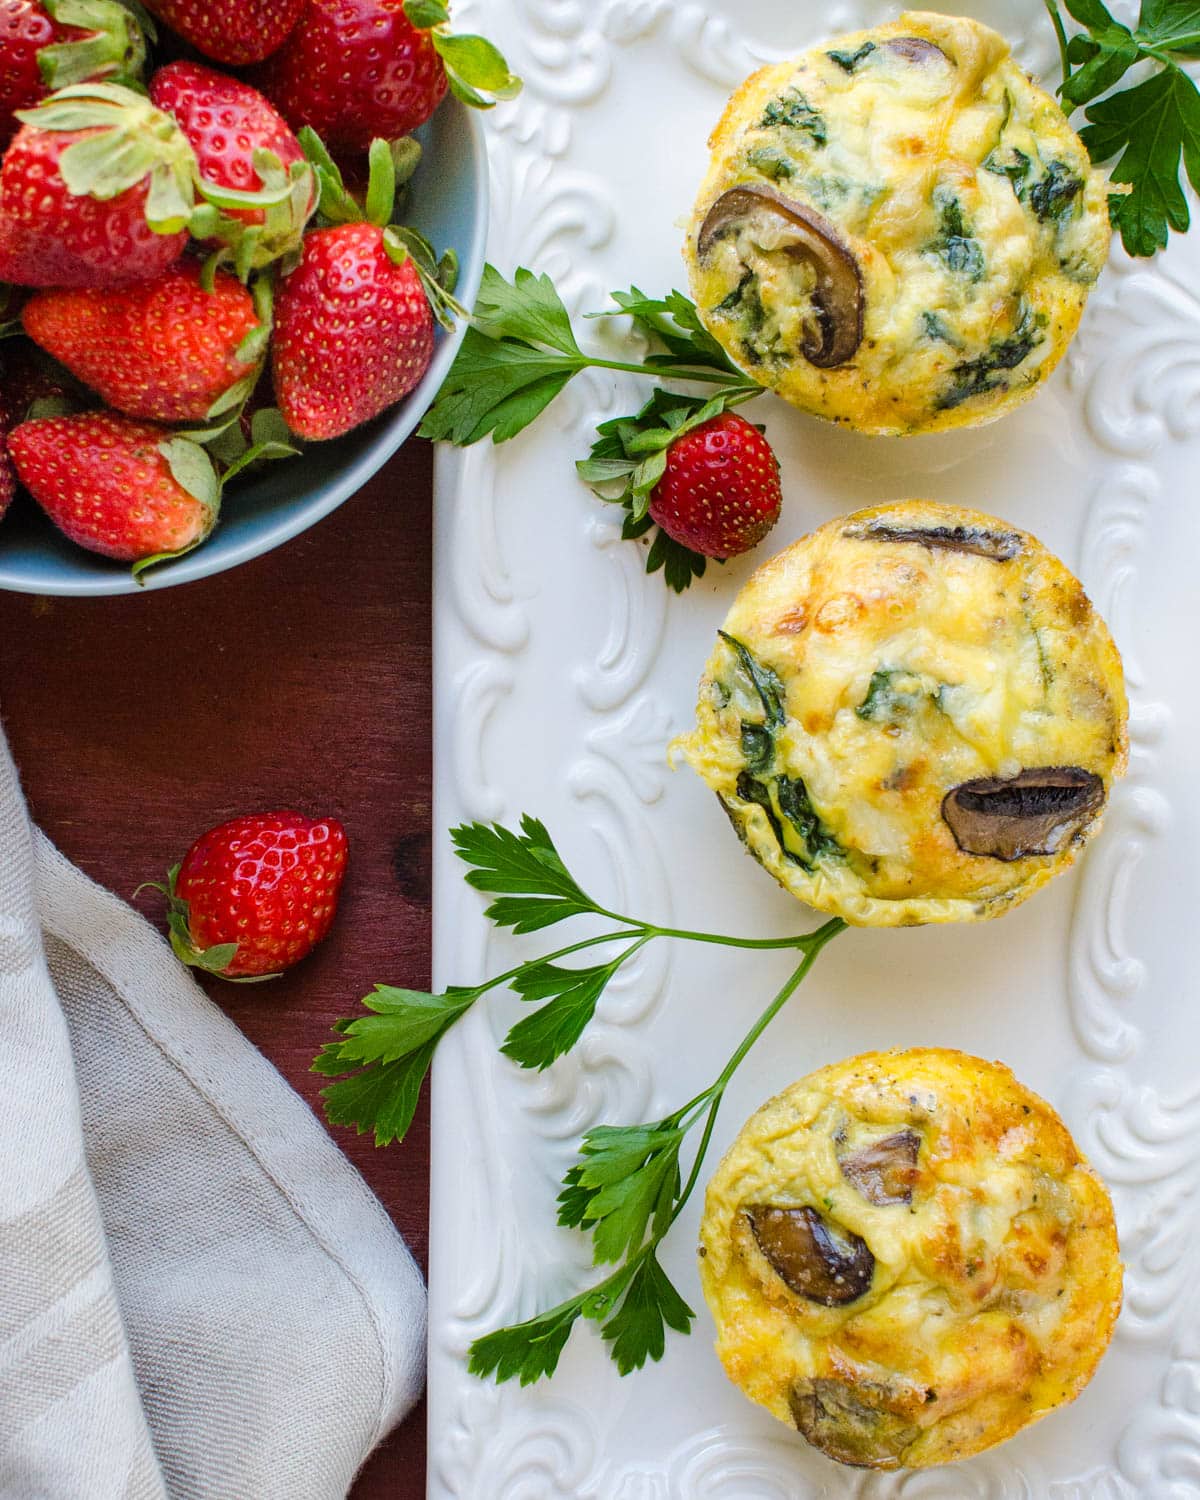 Serving the mushroom and spinach egg bakes on a platter.